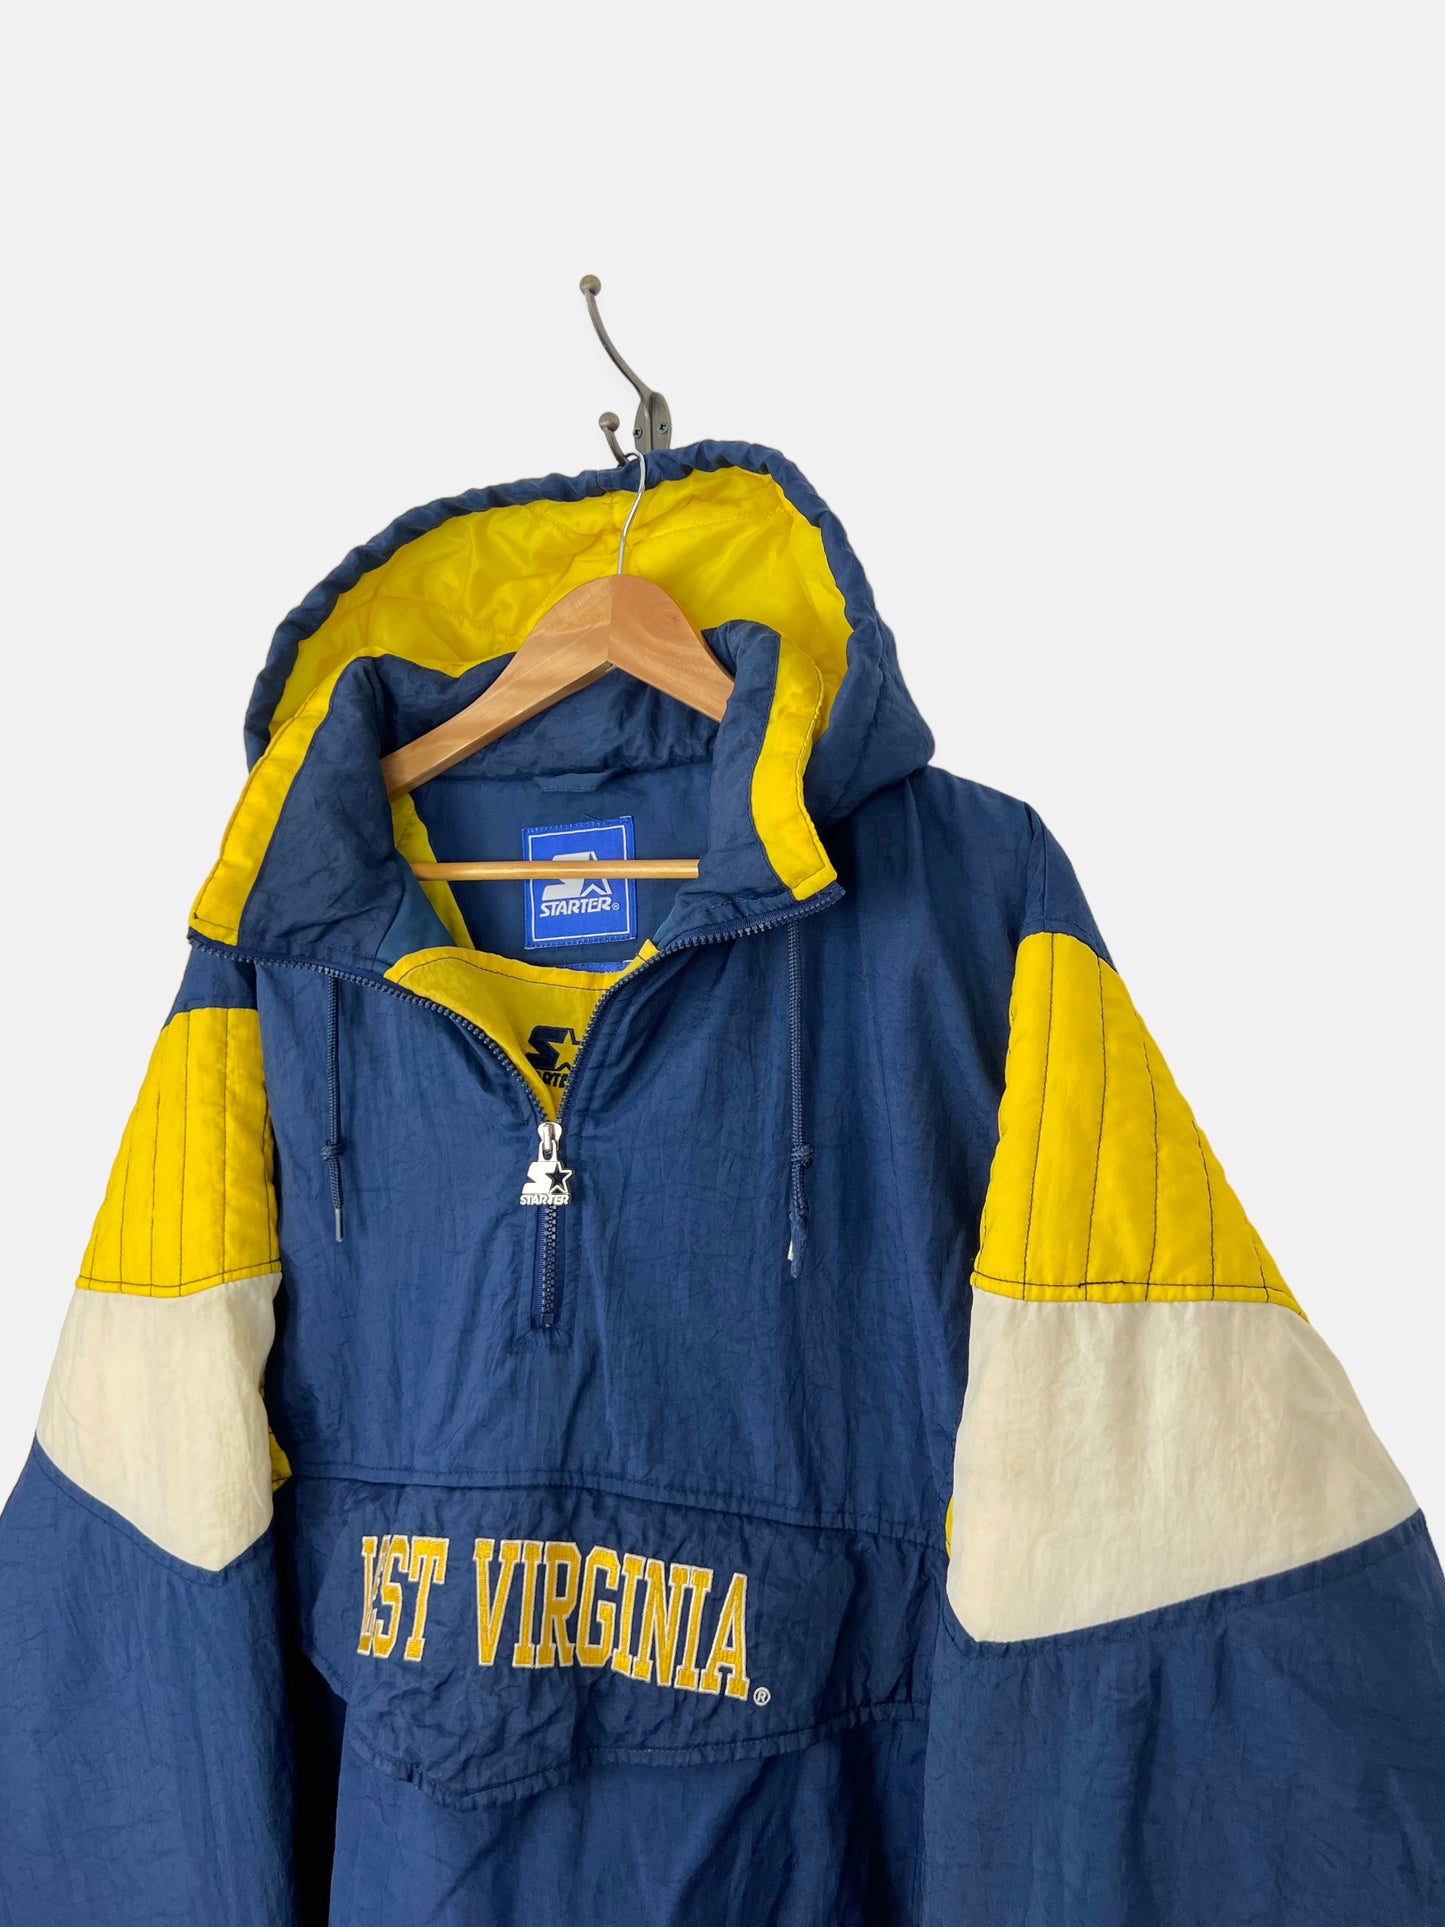 90's West Virginia Starter Embroidered Vintage Puffer Jacket with Hood Size XL-2XL